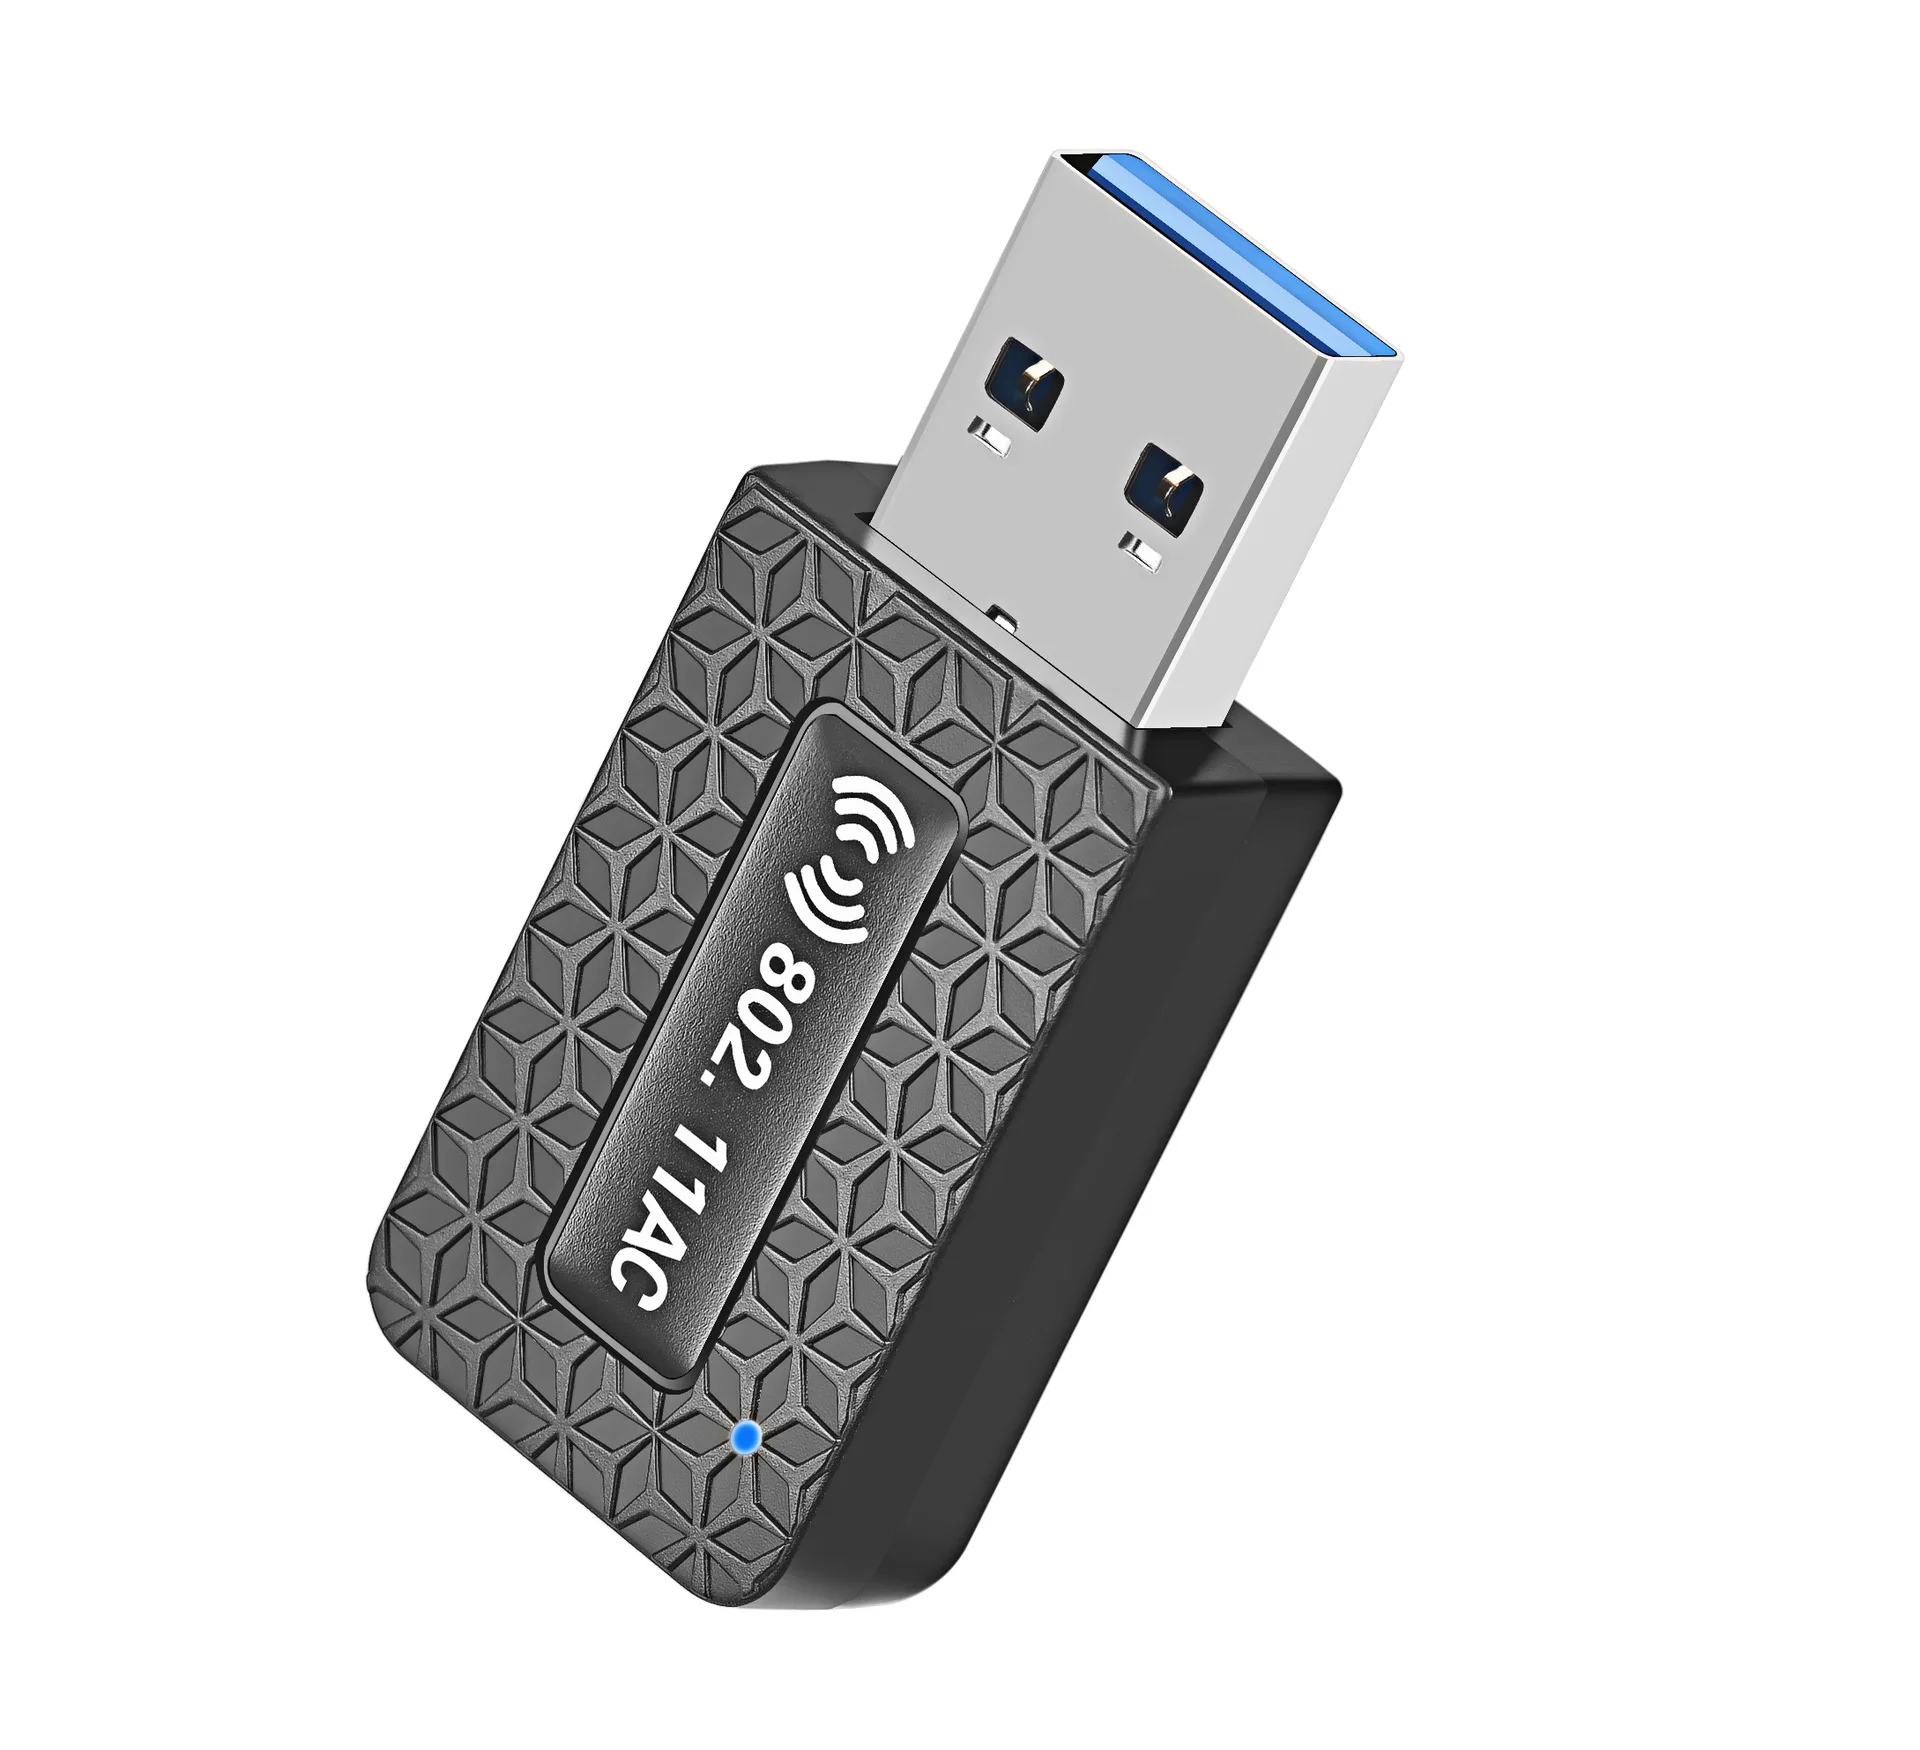 

802.11AC 1300mbps USB3.0 Antenna PC Mini Computer Network Card Receive Wireless Dual Band Wifi USB Adapter